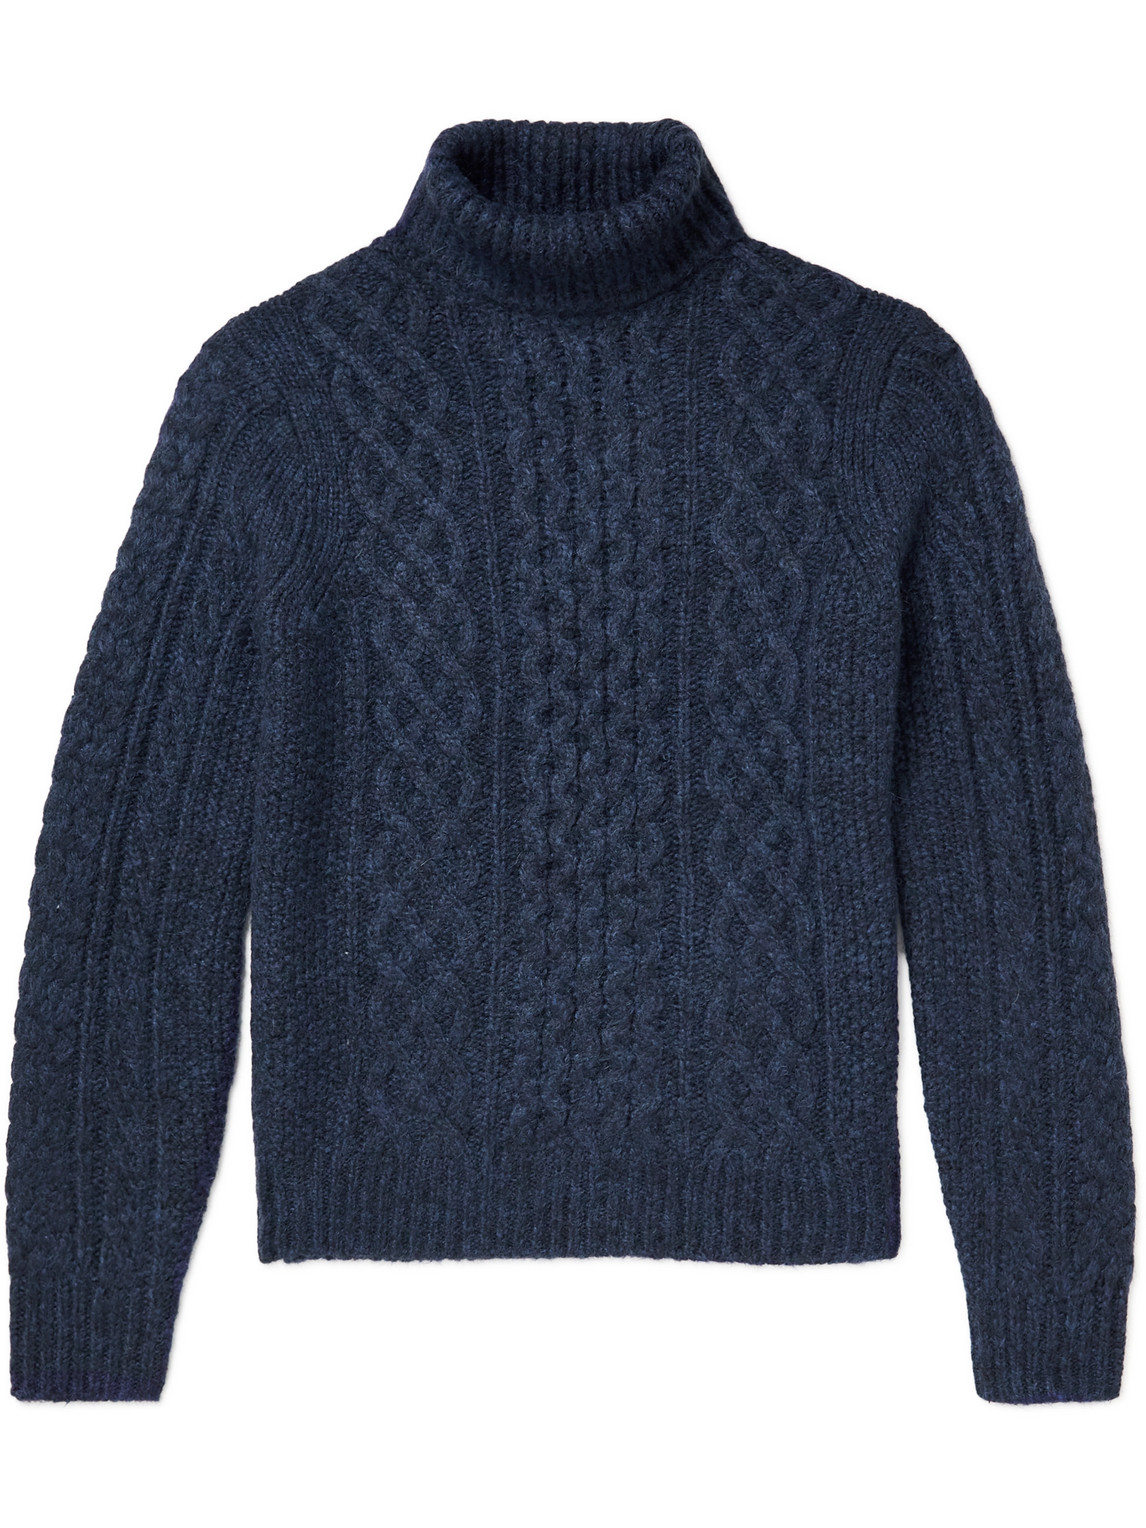 ALEX MILL RECYCLED CABLE-KNIT ROLLNECK SWEATER